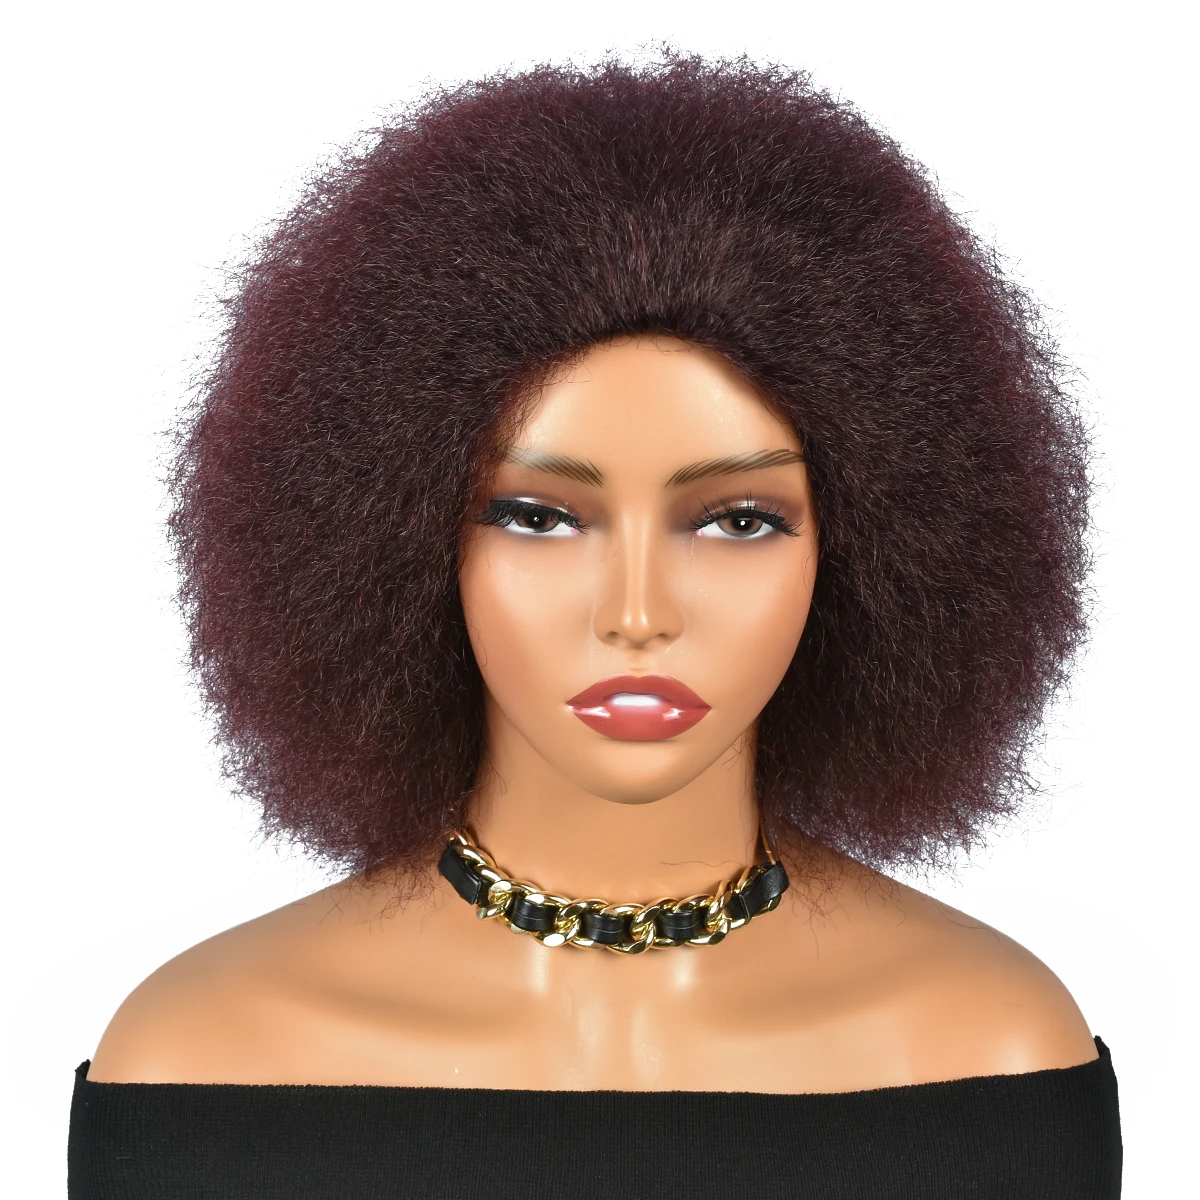 

MISS ROLA Afro Wigs Fluffy Straight Synthetic Wig for Black Women Kinky Straight Hair Natural Colorfor Women